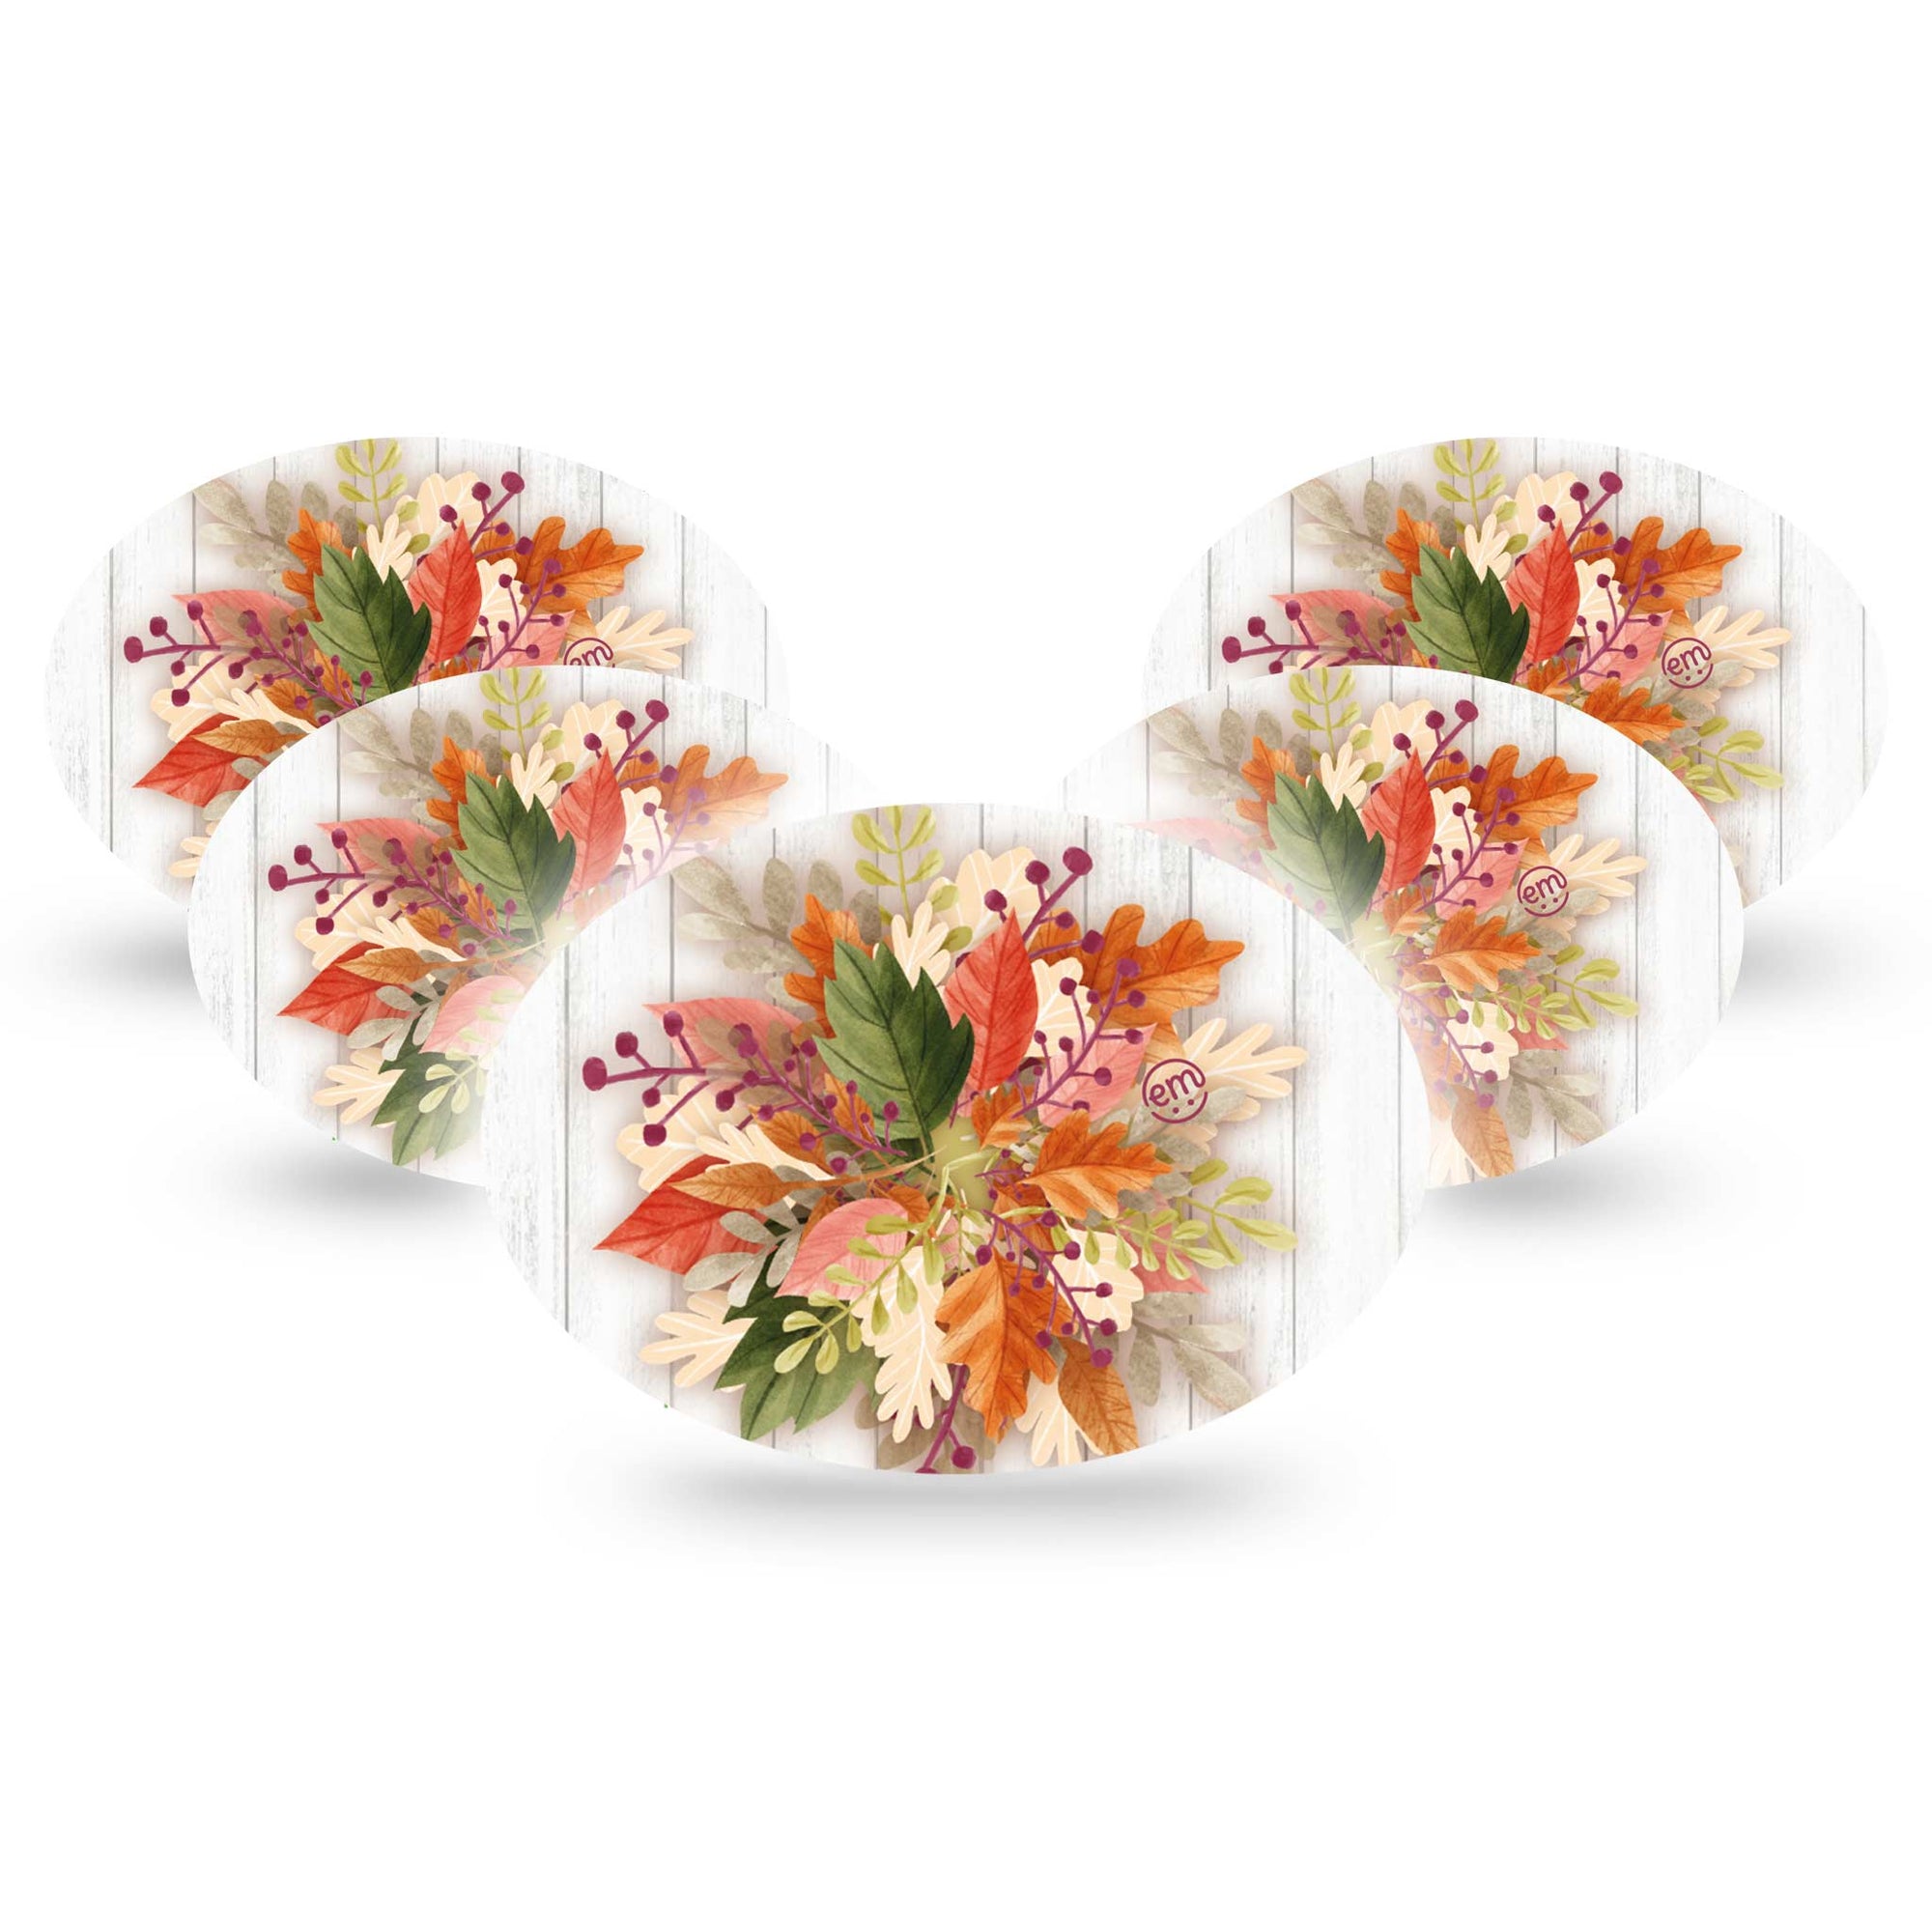 Medtronic Enlite / Guardian ExpressionMed Autumn Leaves Universal Oval Tape, 5-Pack, Early fall leaves festiv reef Medtronic Overlay patch design